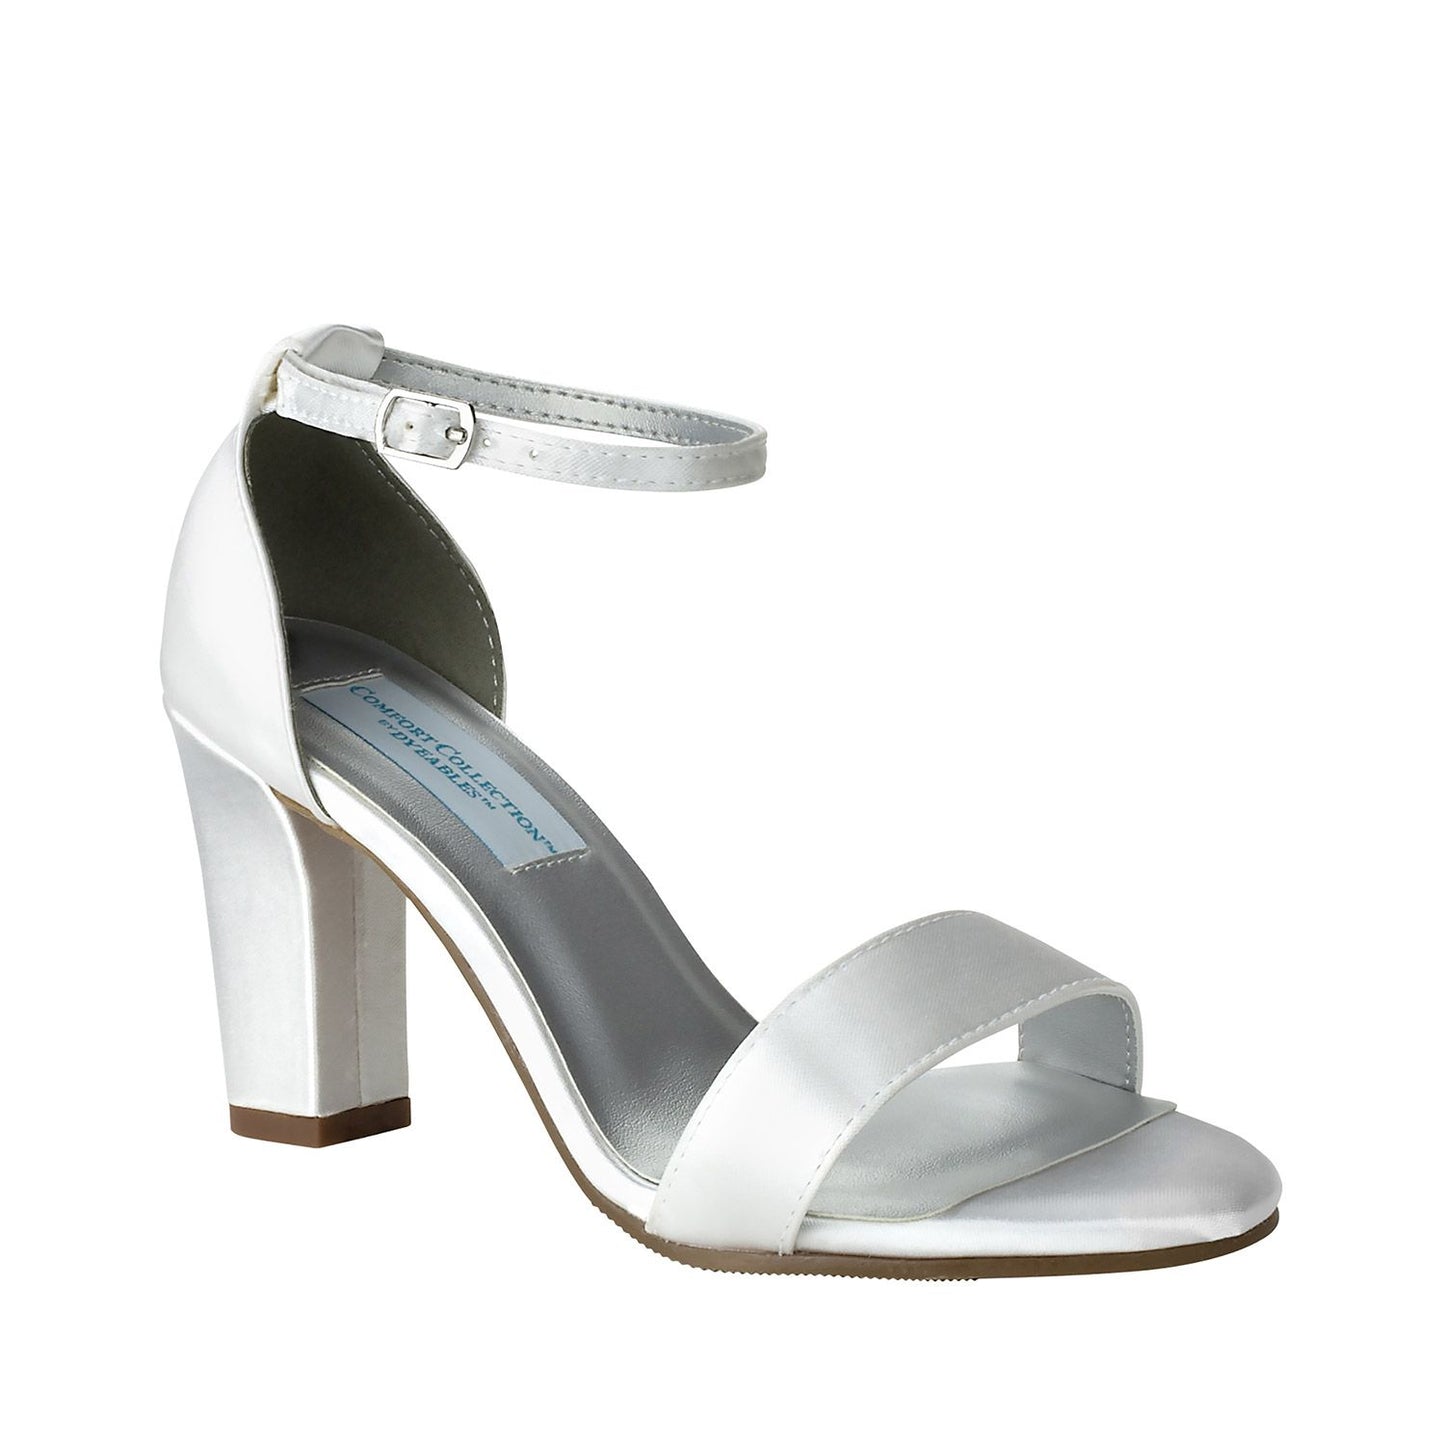 Dyeable open toe shoe with 2.5" heel and ankle strap